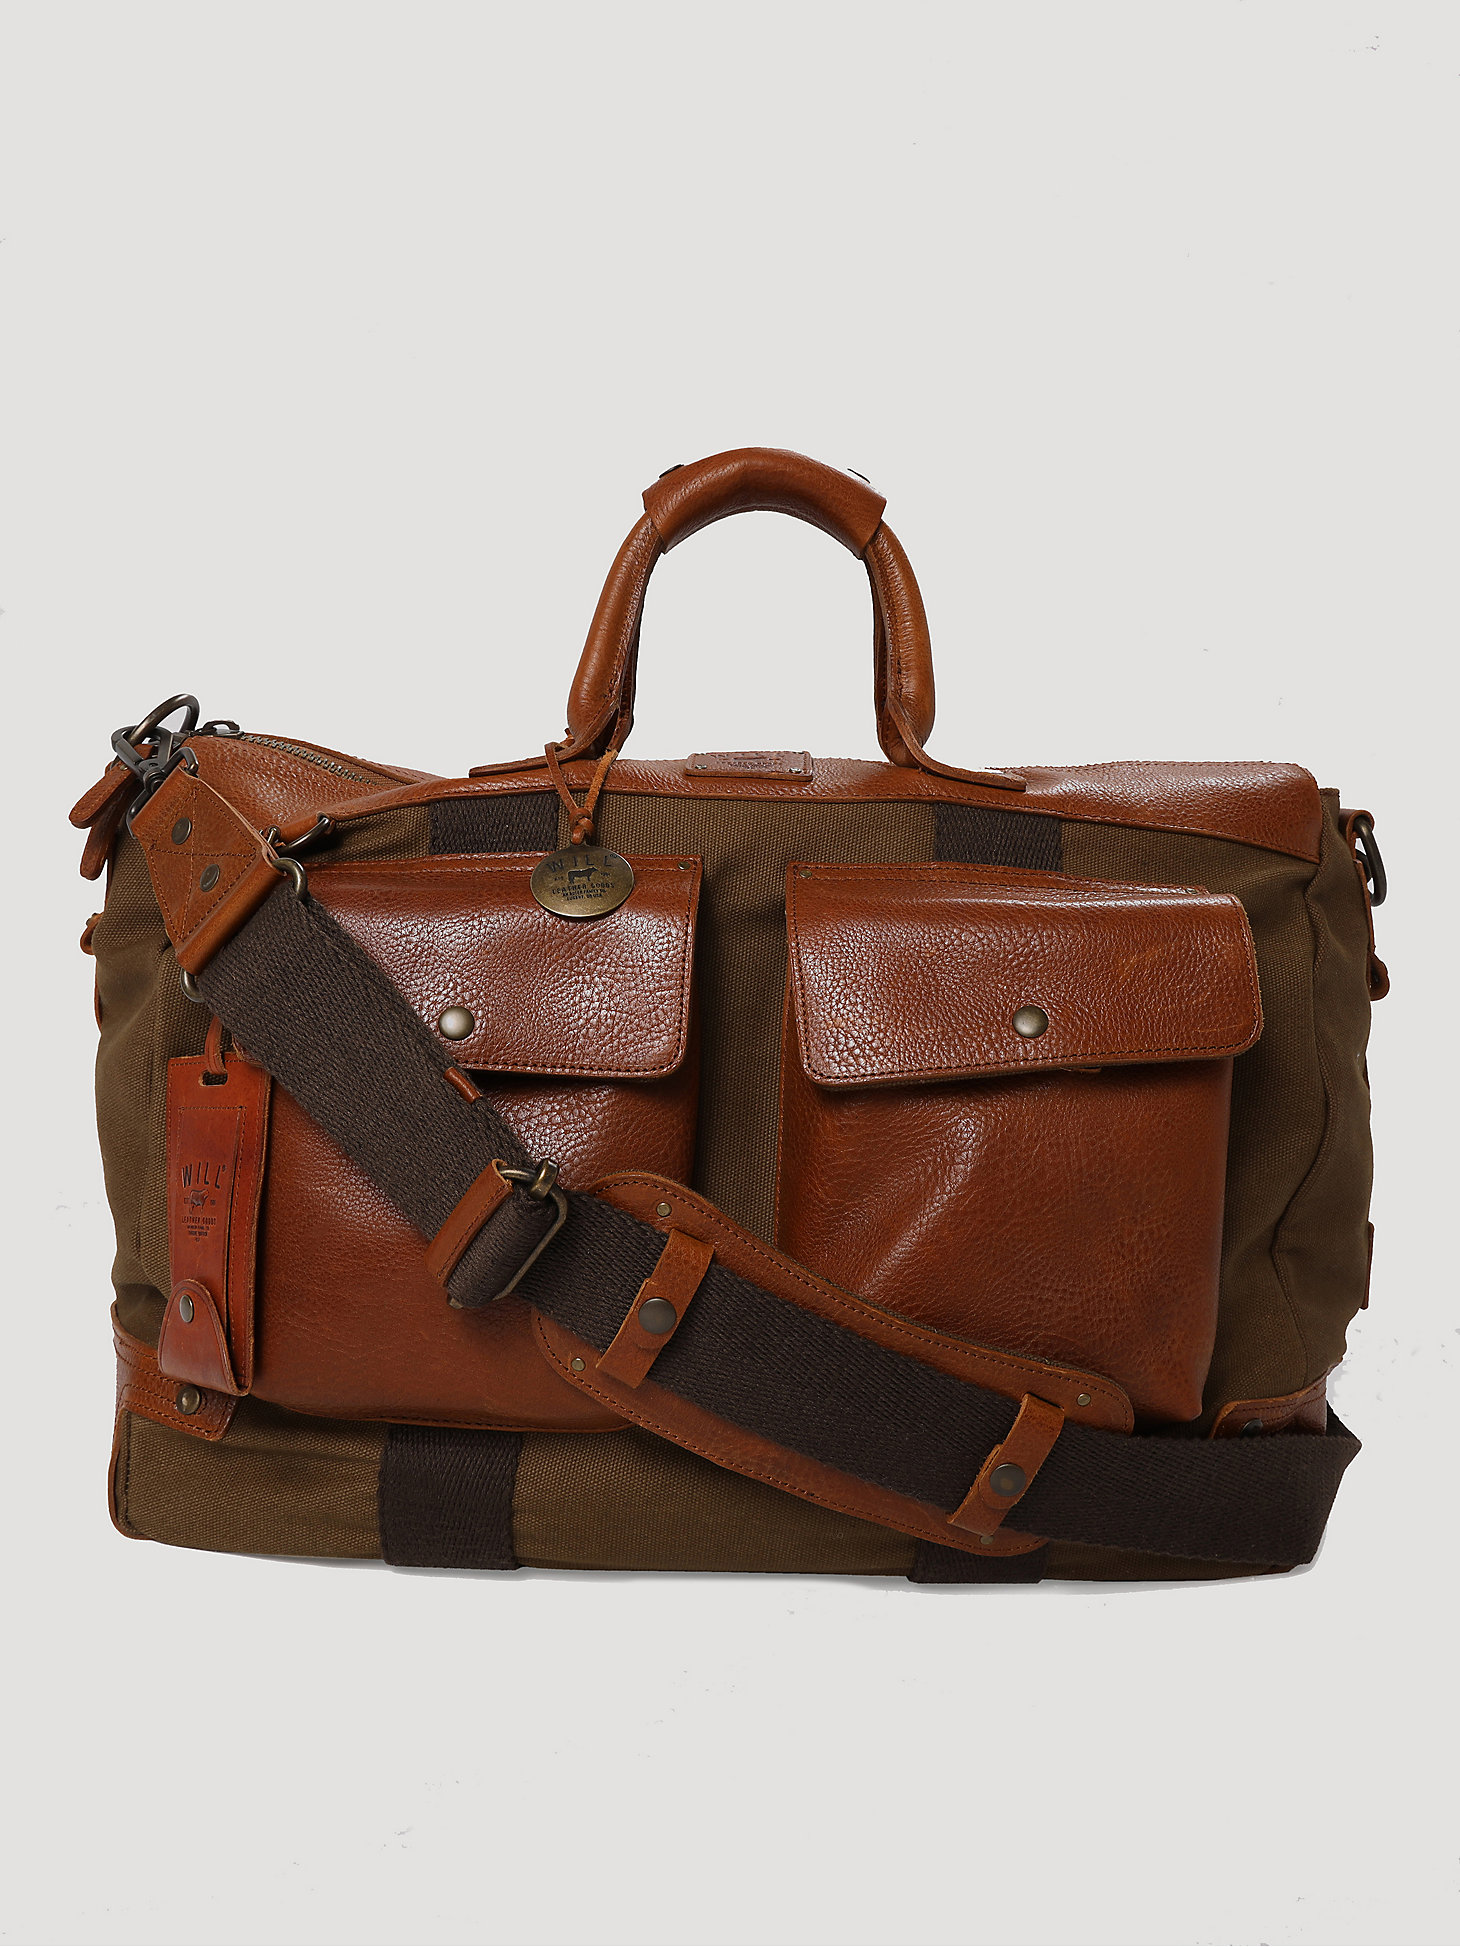 Wrangler X Will Leather Goods 75th Anniversary Cargo Pocket Traveler Bag in Brown alternative view 5